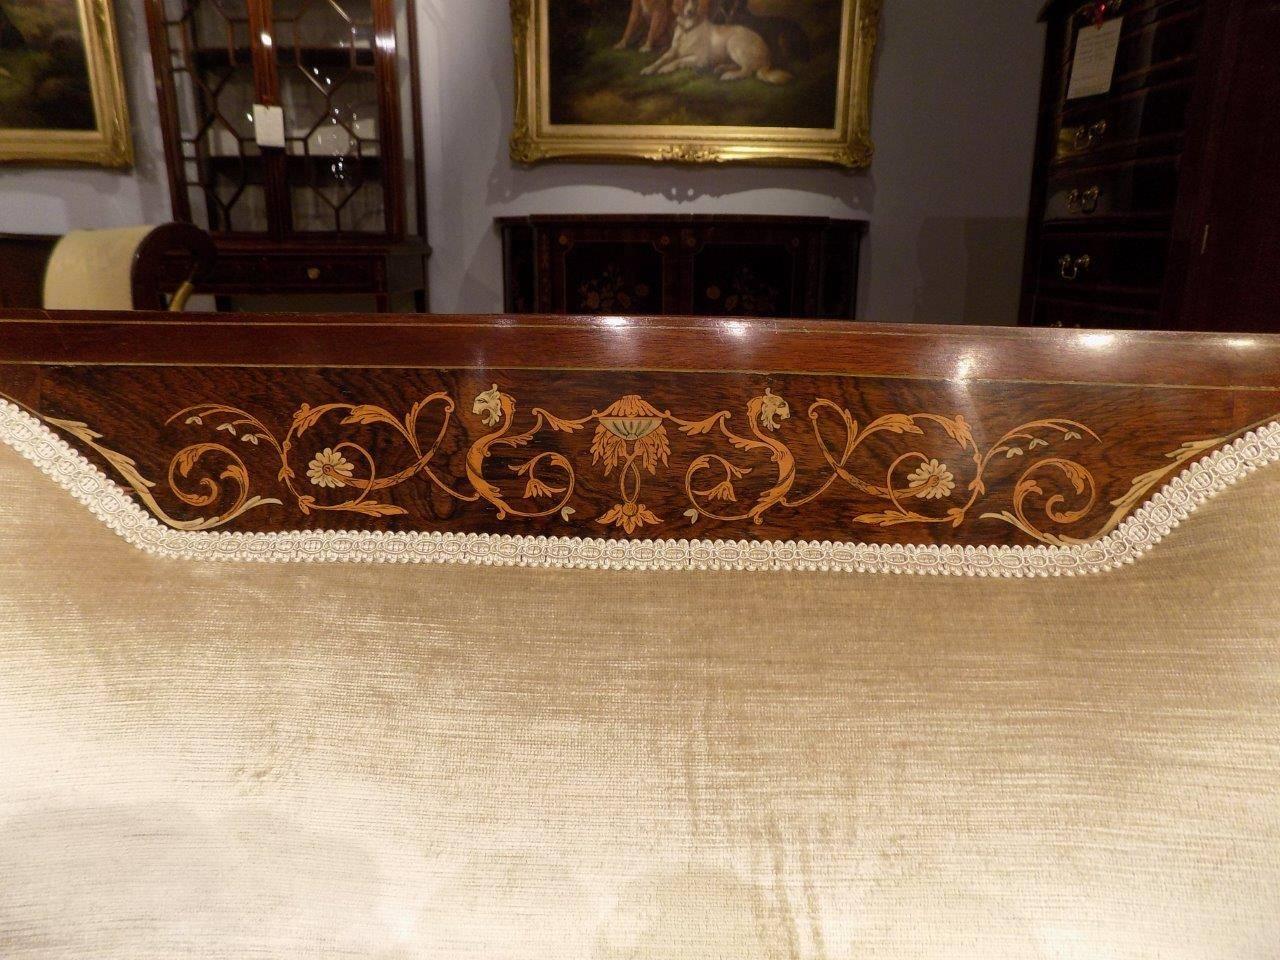 A fine quality mahogany and marquetry inlaid Edwardian period sofa. The curved padded back with a fine classical marquetry and pen-work inlaid panel and string inlaid detail, flanked by pierced and inlaid splats, with open arms and a padded seat